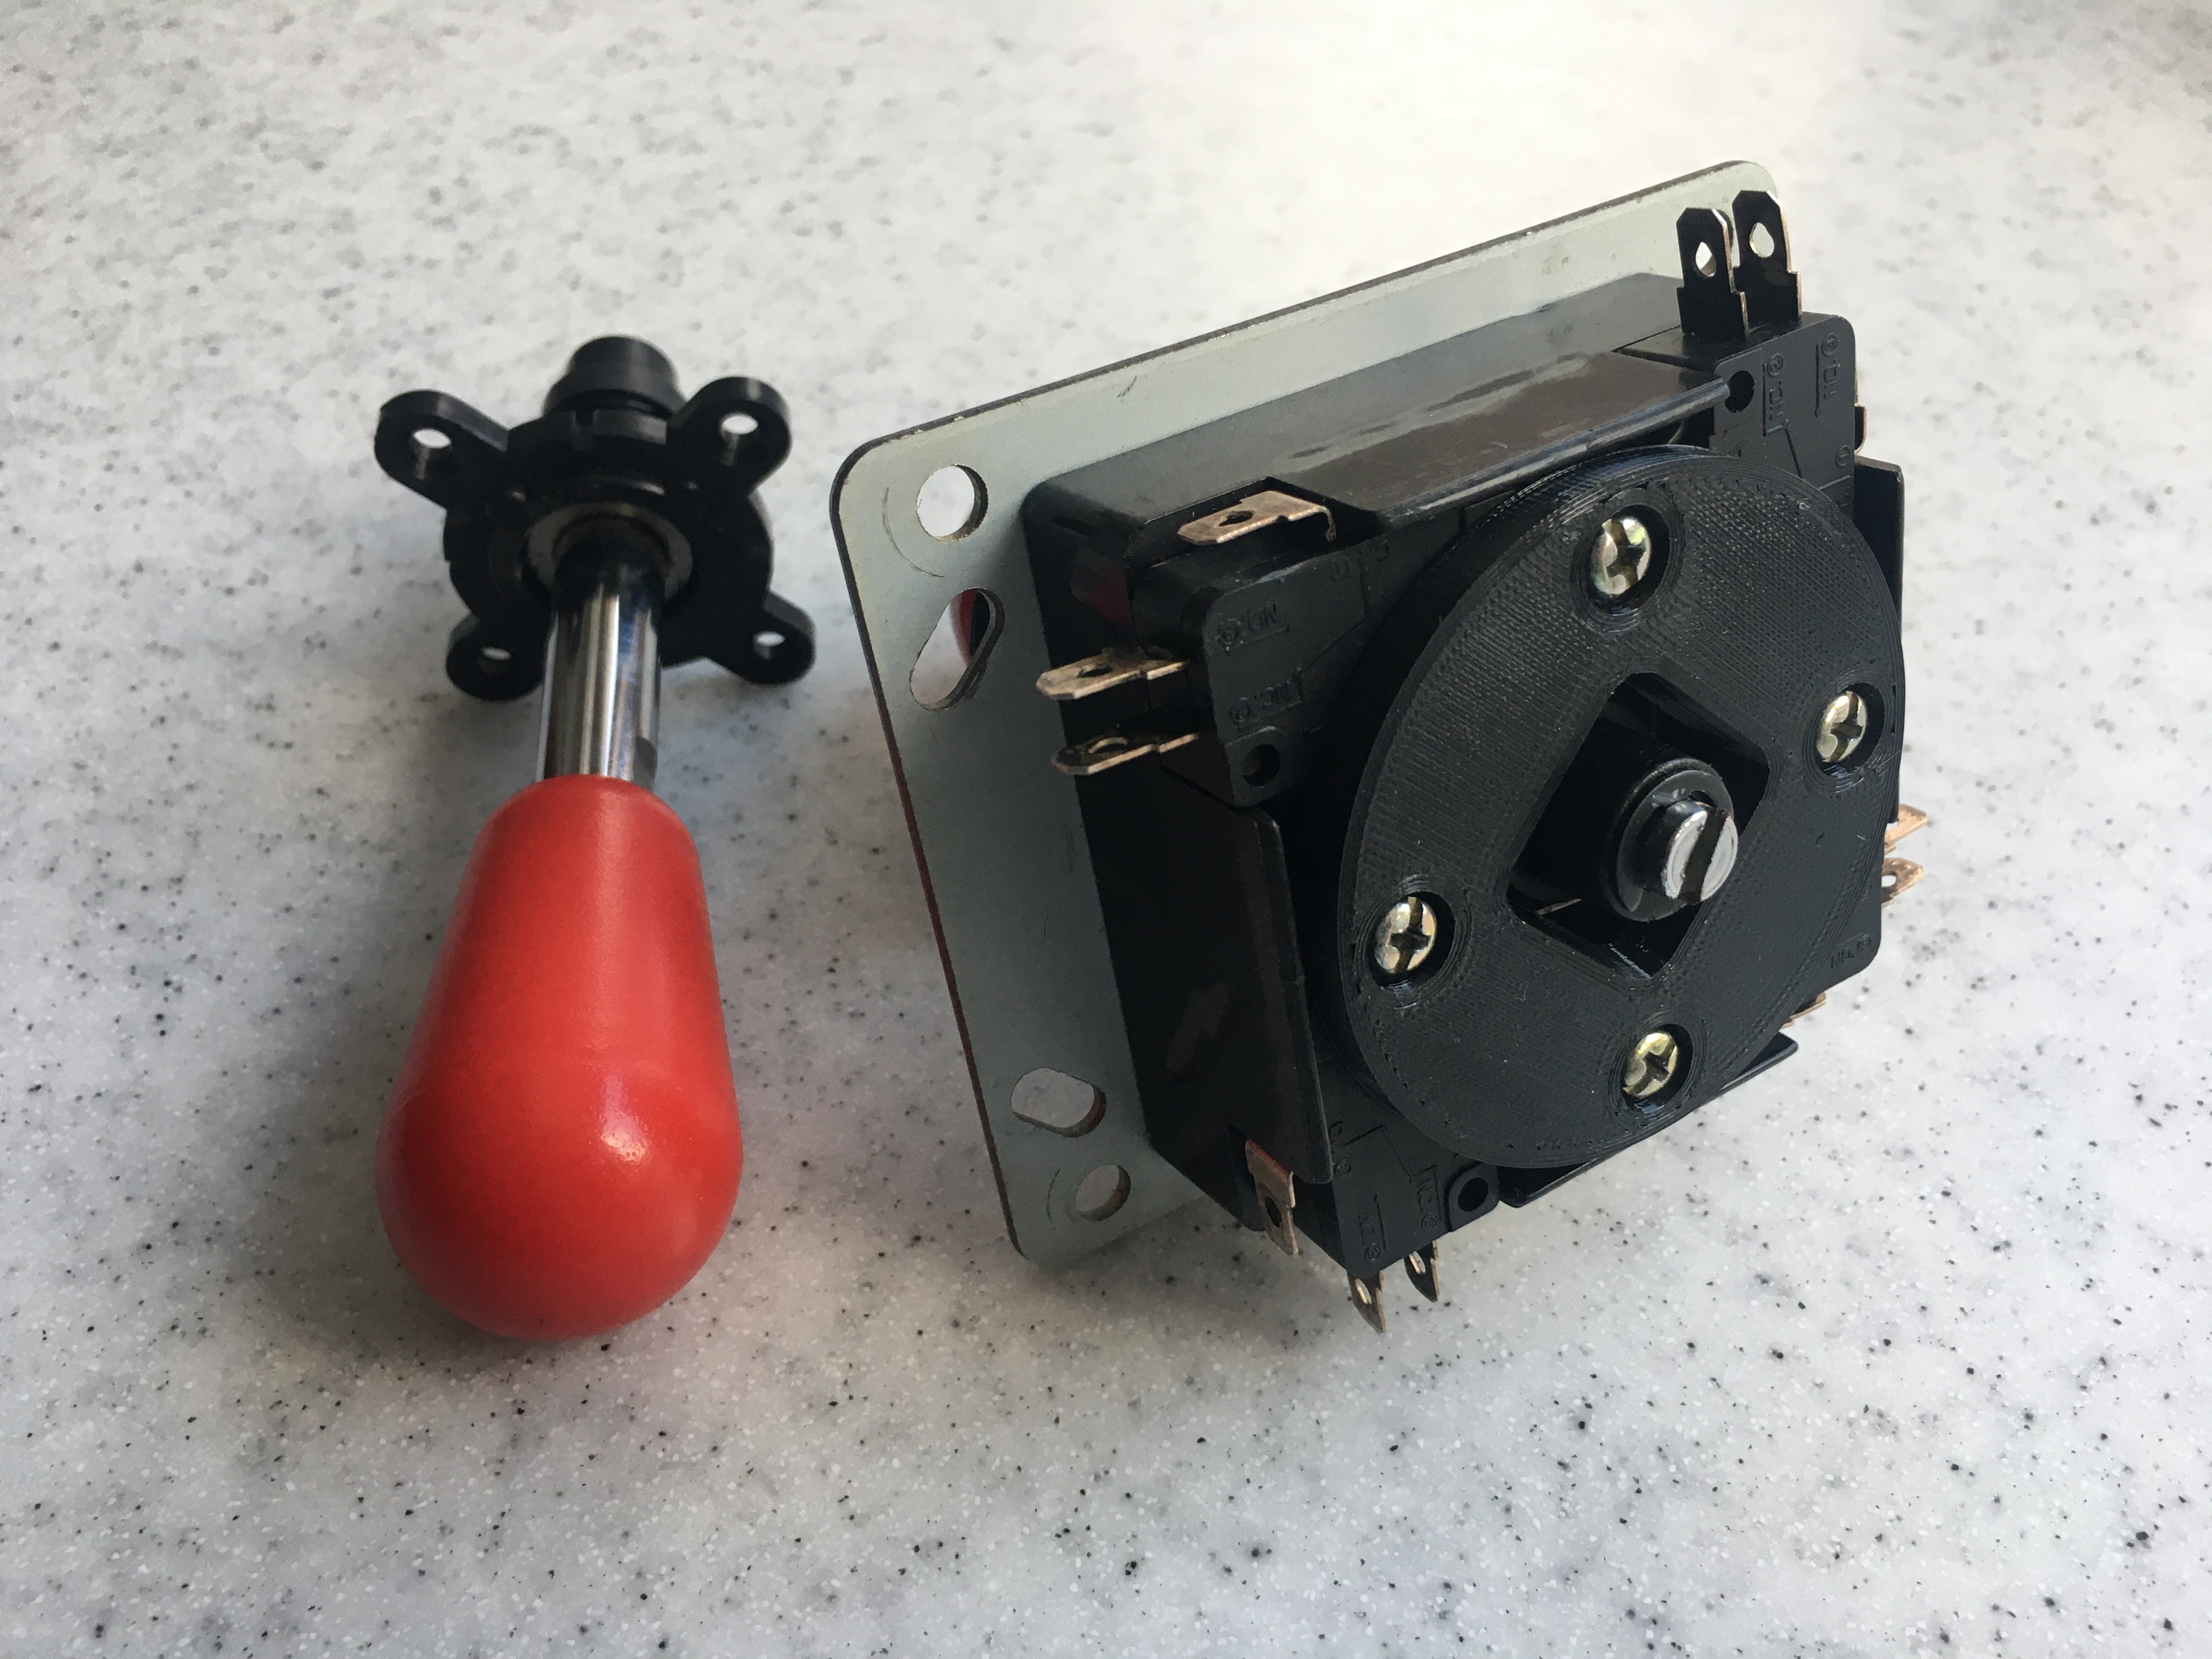 4-way Directional restrictor for the Sanwa JLW arcade joystick